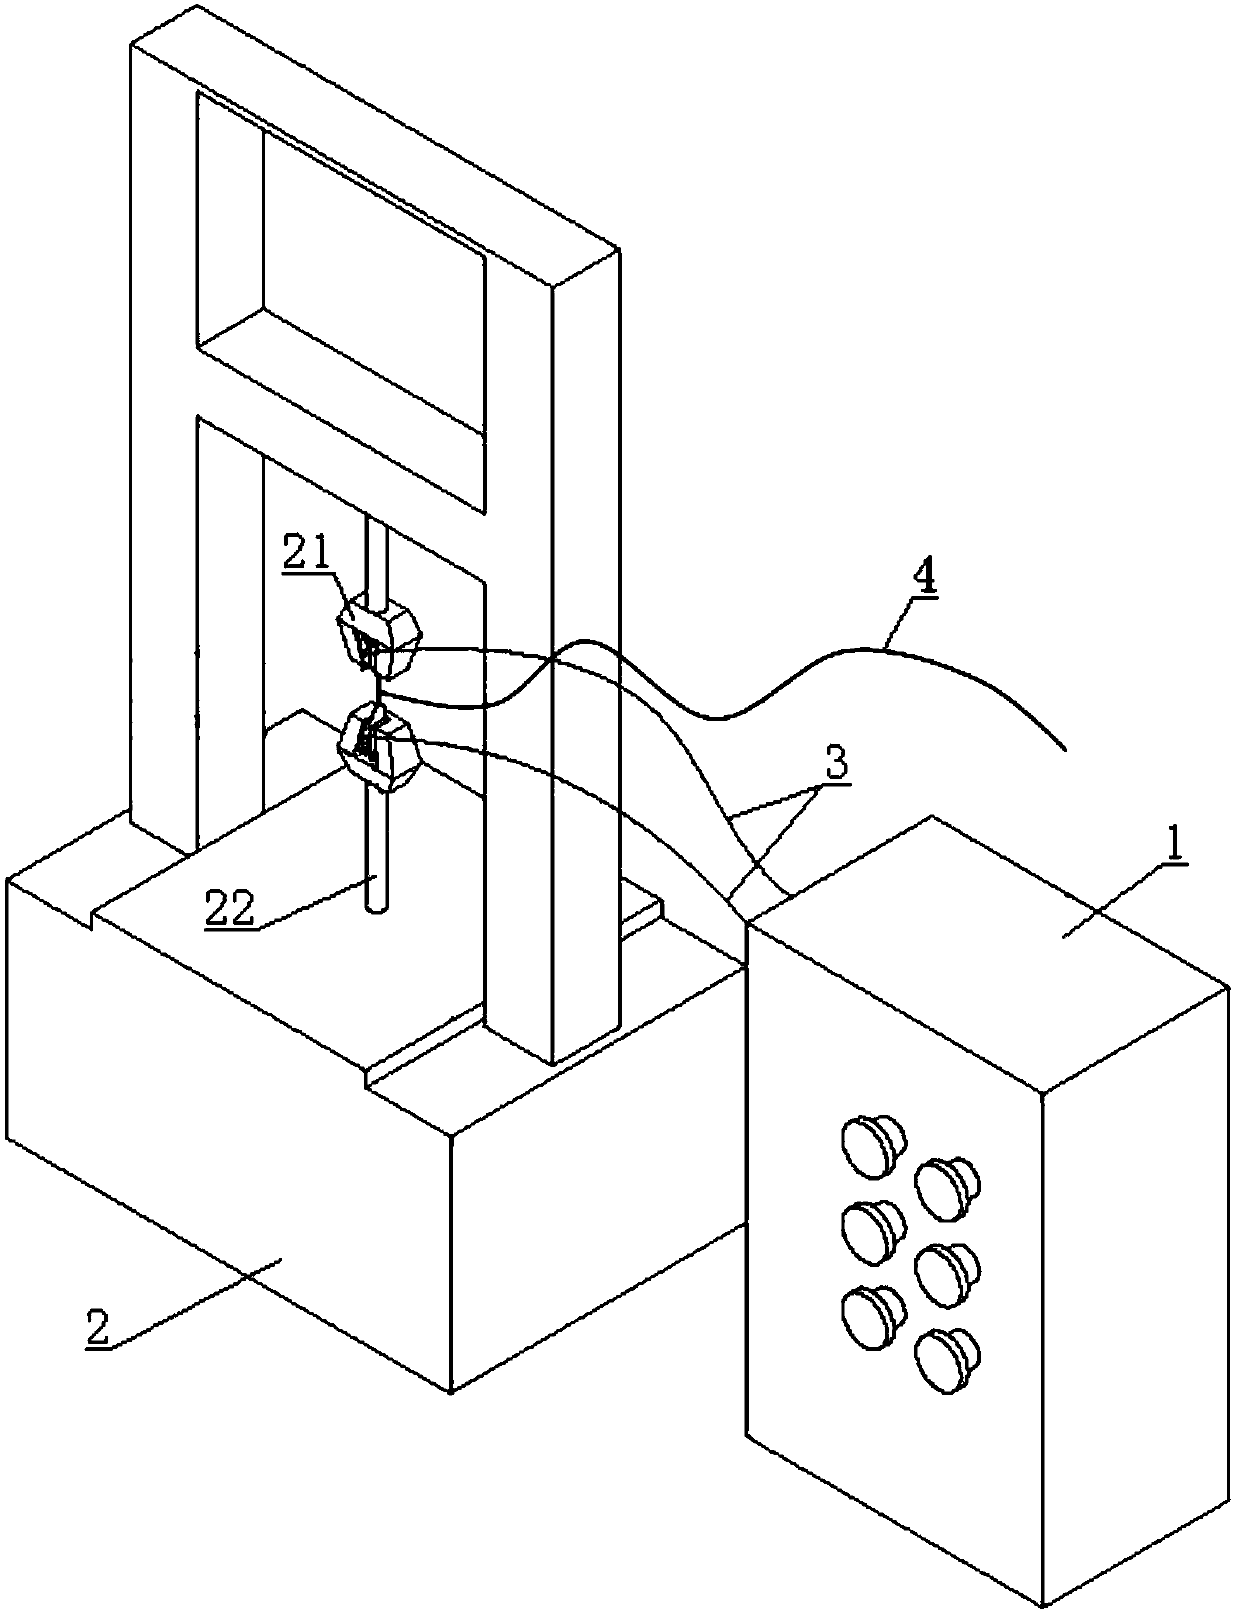 Testing device for assisting rod-shaped sample uniaxial drawing through pulse current